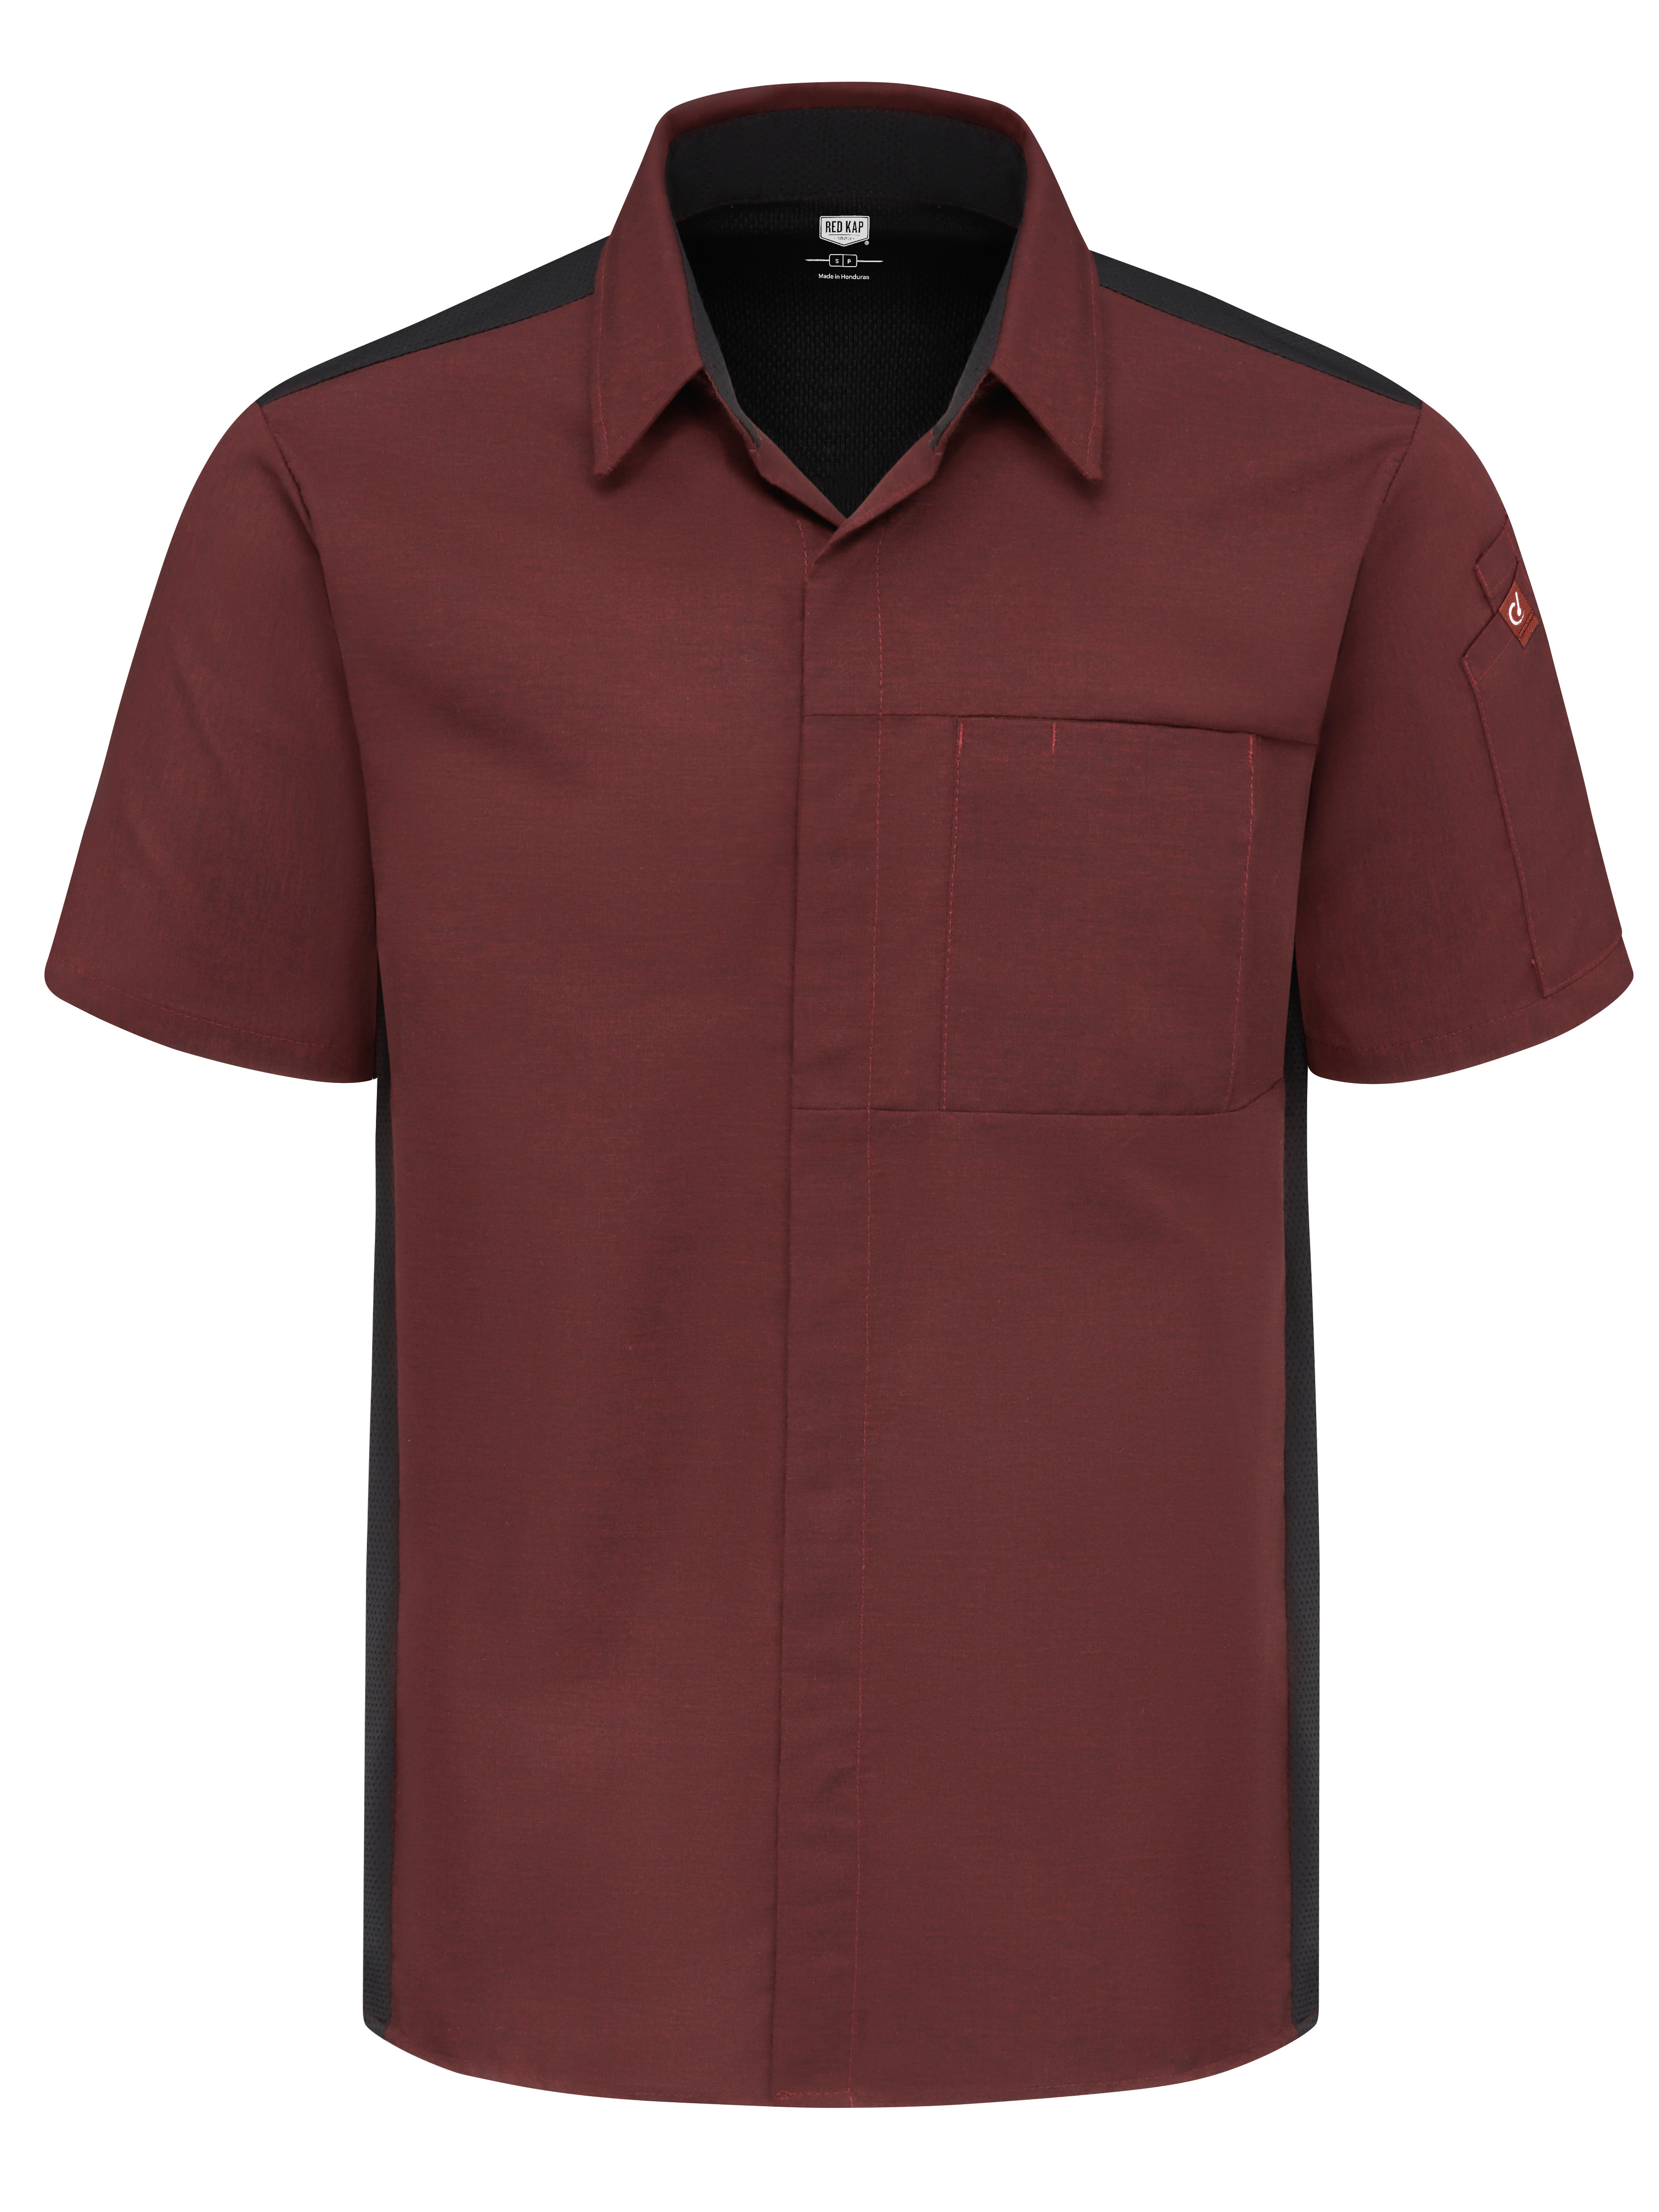 Picture of Red Kap® 502M Men's Airflow Cook Shirt with OilBlok